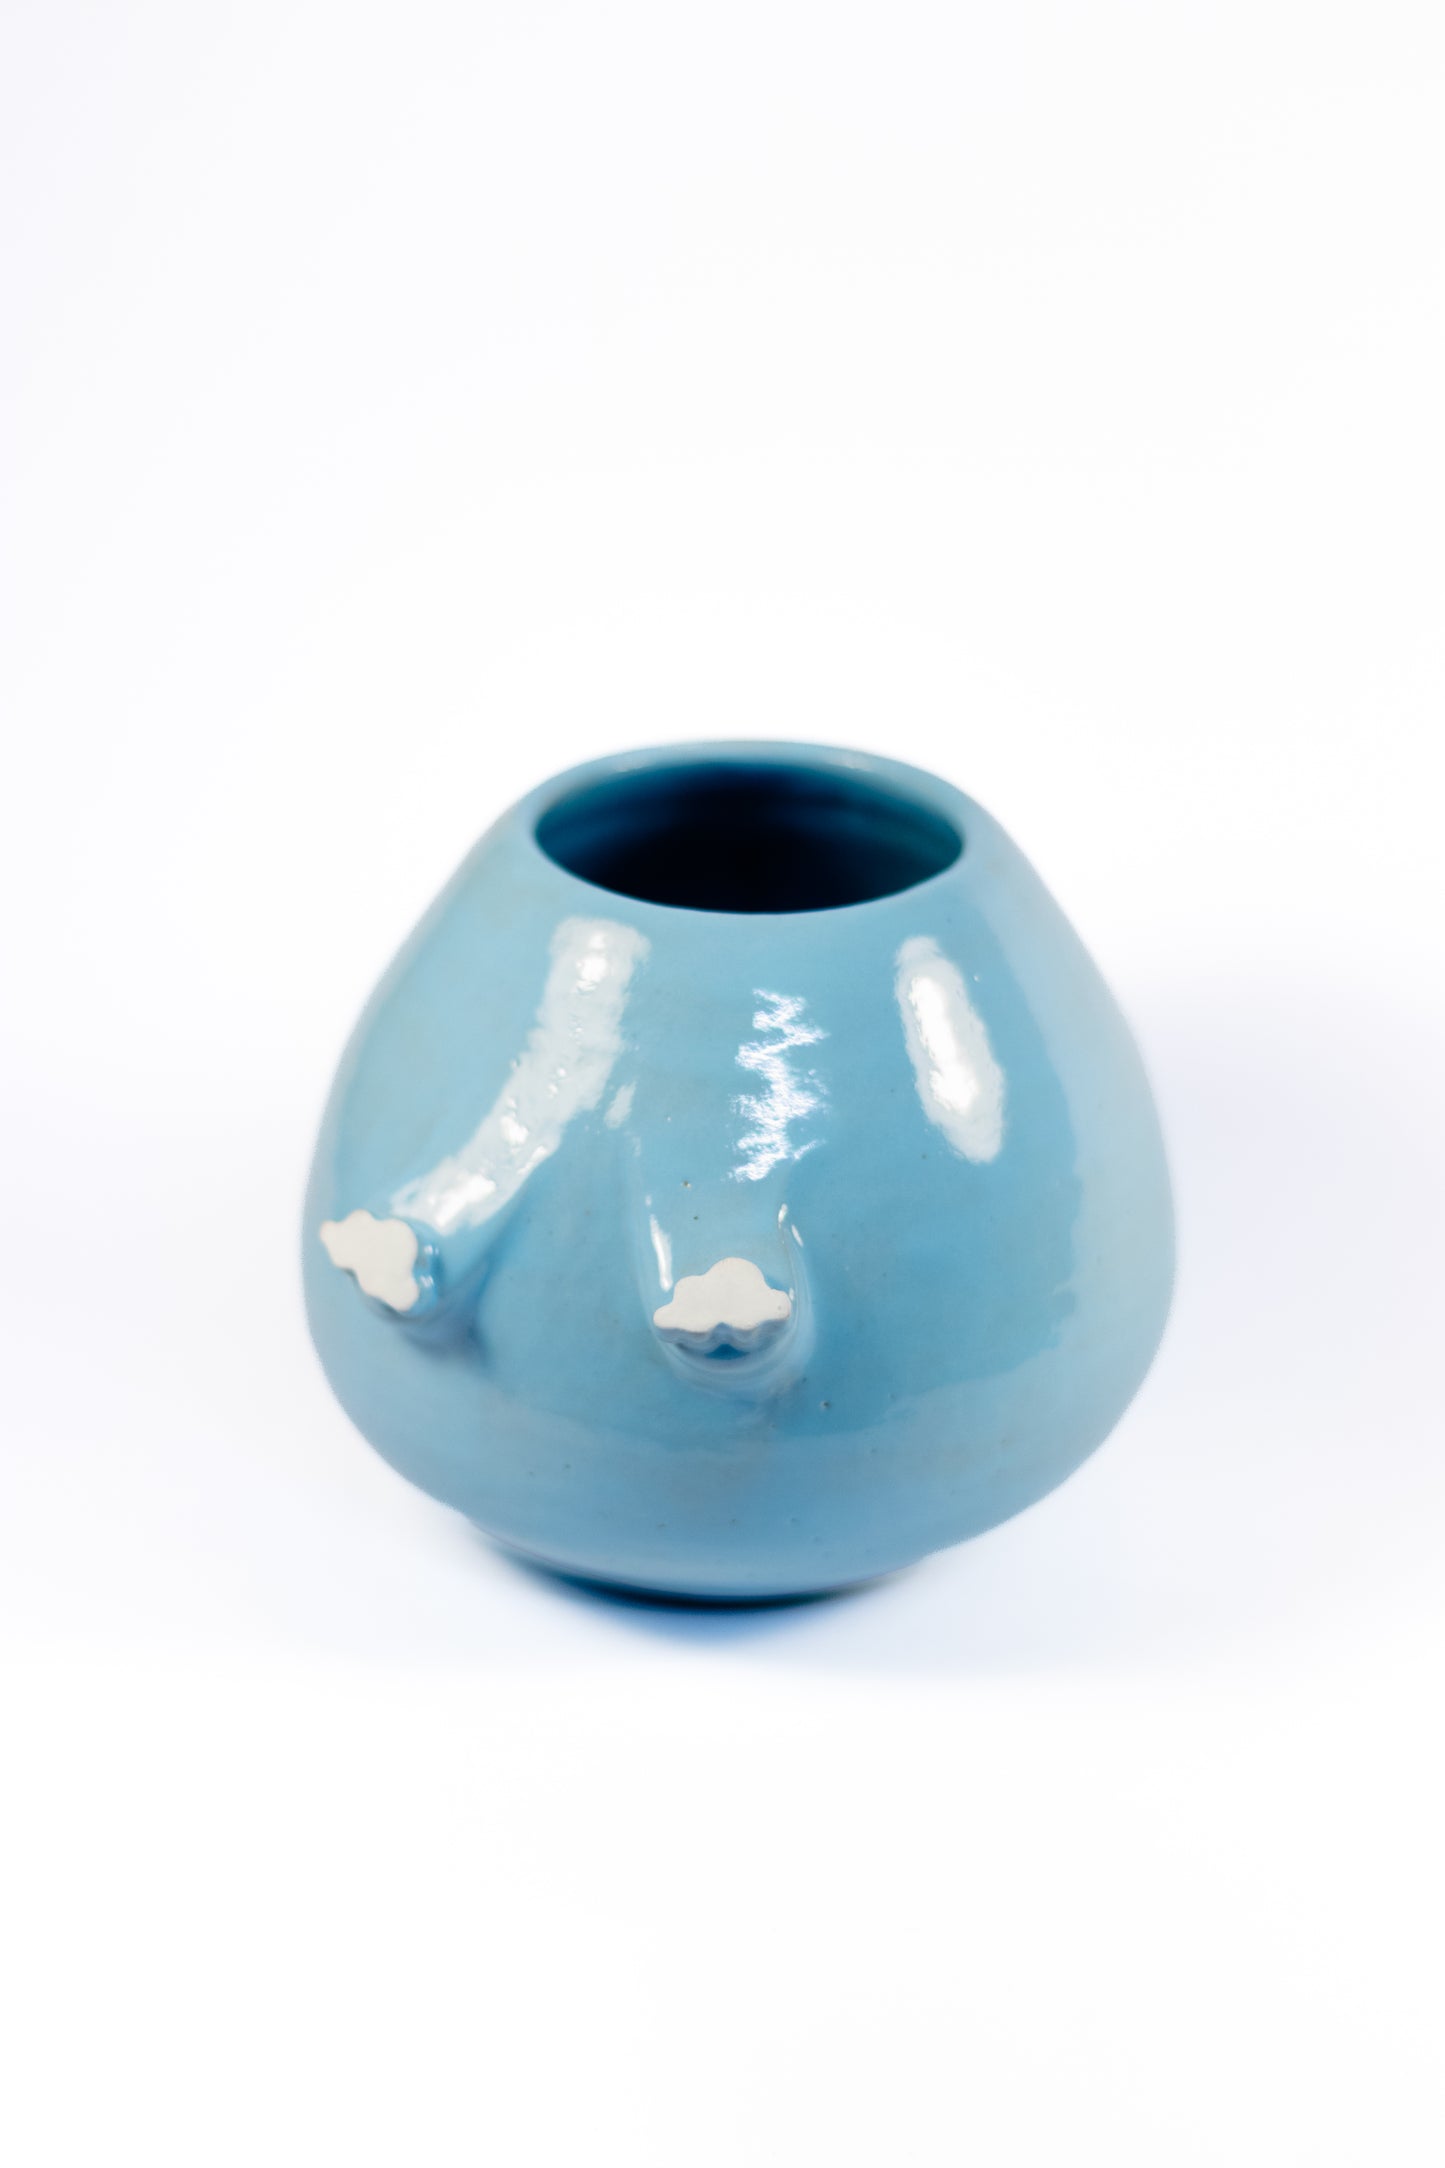 cloudy breasts small vase